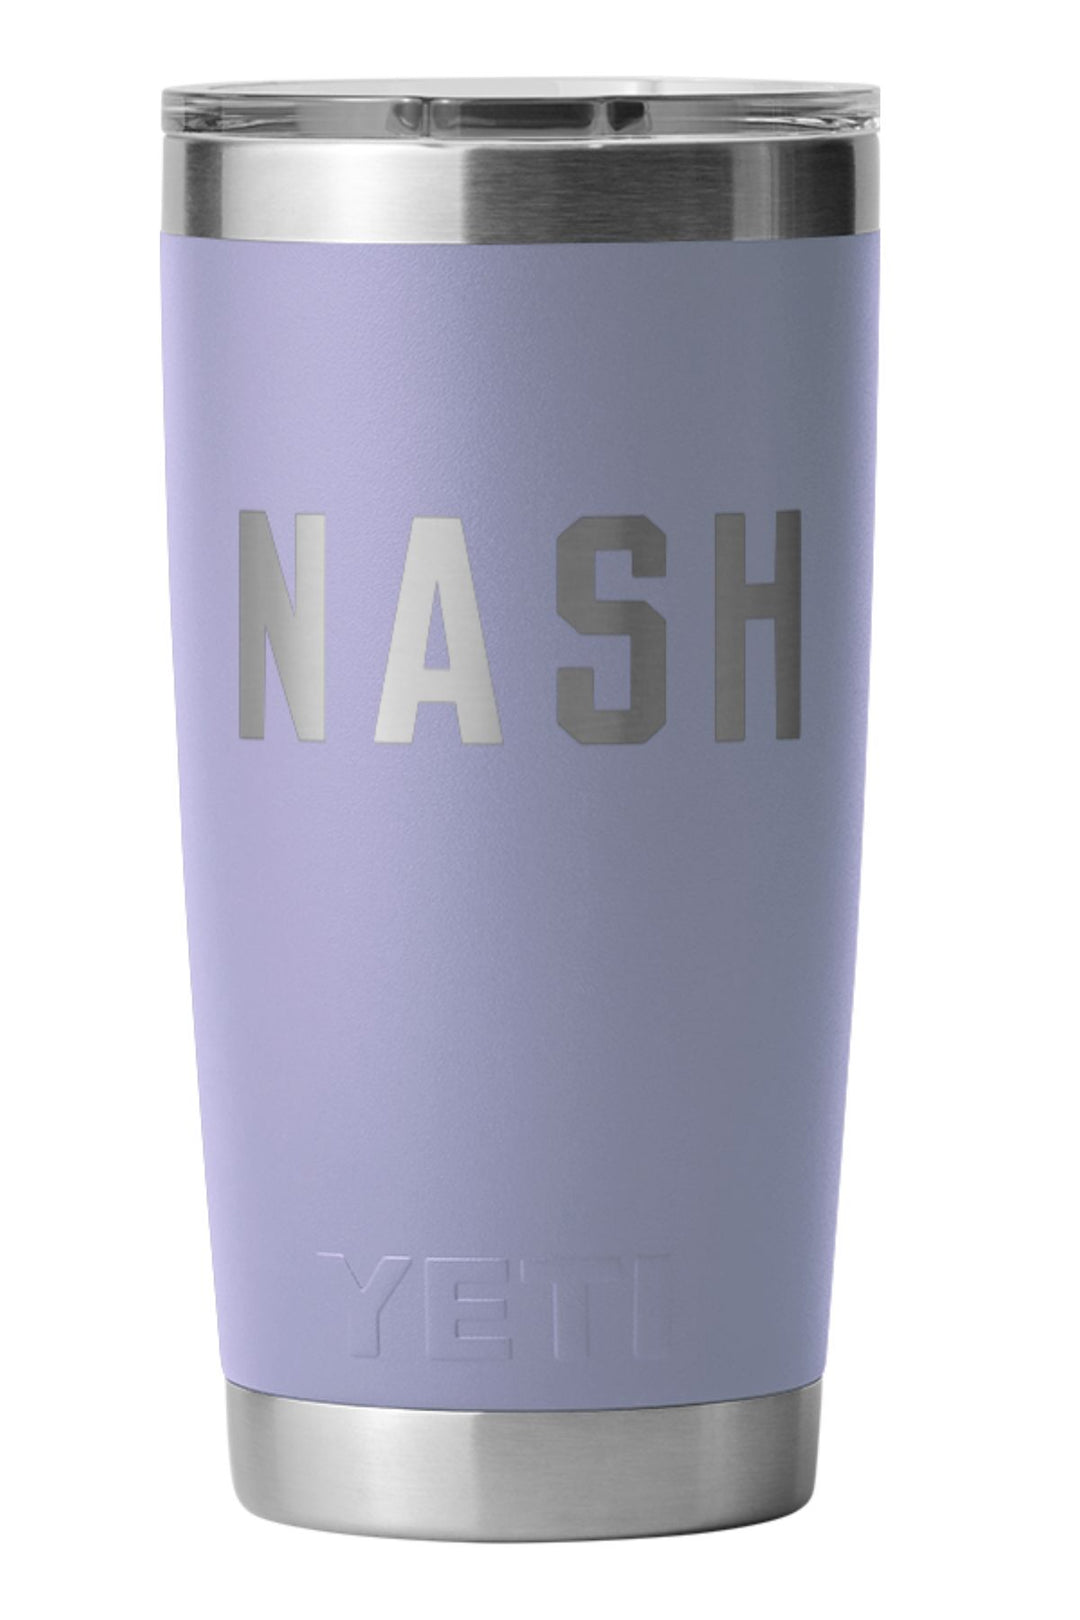 Yeti restocks its limited-edition Cosmic Lilac color collection 